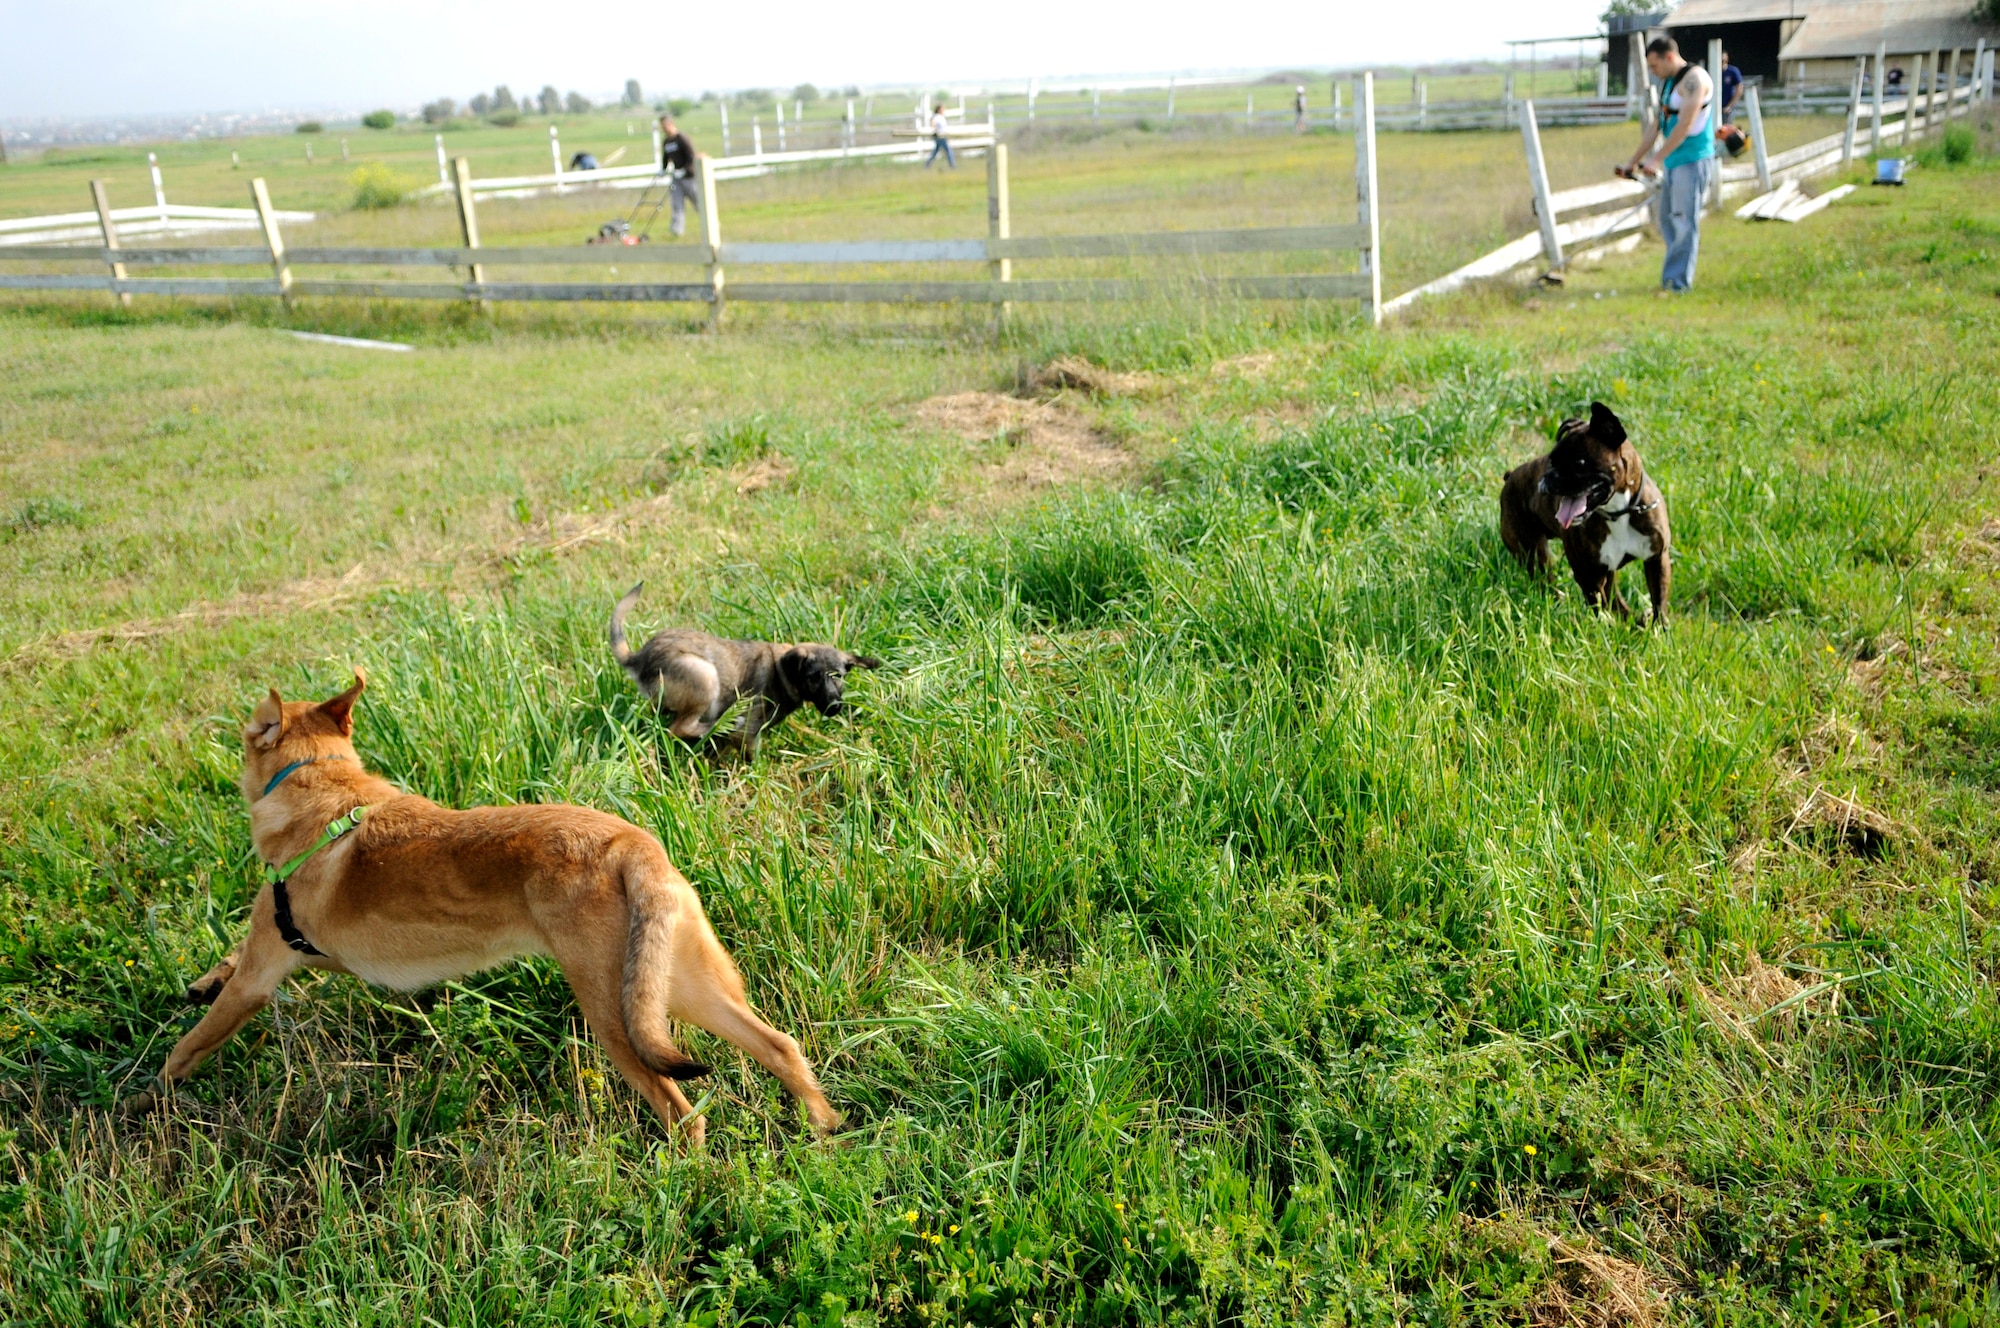 Volunteers' pets play while their owners gather trash and debris, mend fences, and mow and trim greenery at the base dog park April 21, 2012, at Incirlik Air Base, Turkey. Twelve volunteers spent five hours making the dog park a better place for the base's furry residents to play. (U.S. Air Force photo by Staff Sgt. Kali L. Gradishar/Released)